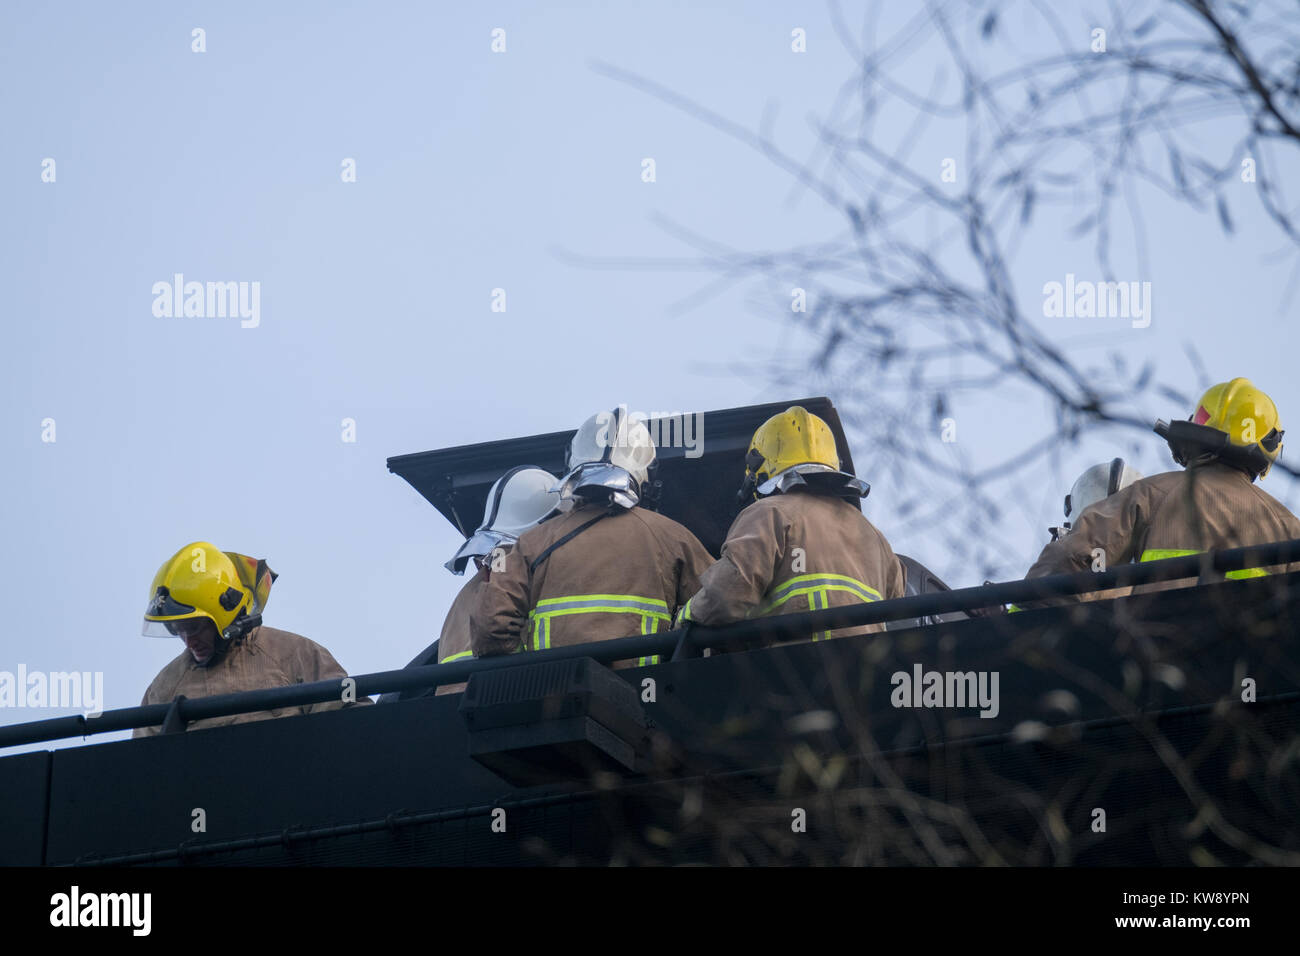 Liverpool, UK: Jan 1, 2018. Emergency services remain at the scene of a car park fire on Monday, January 1, 2018 at the Echo Arena car park in Liverpool, UK. The fire, which started on December 31, 2017 is believed to have destroyed all vehicles inside the car park. Credit: Christopher Middleton/Alamy Live News Stock Photo